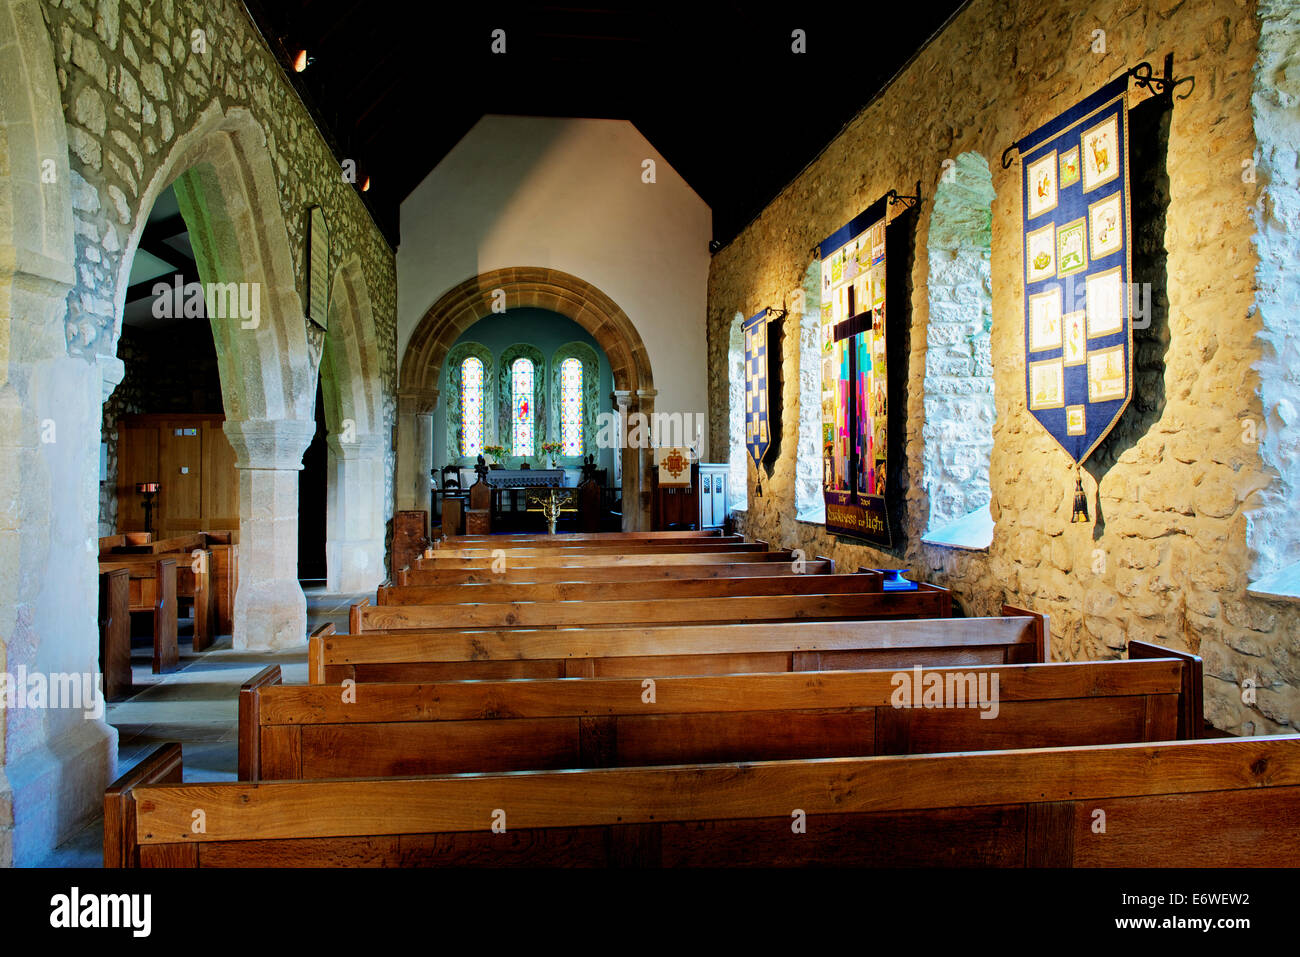 Innenraum der St. Marien Kirche, Conistone, Wharfedale, Yorkshire Dales National Park, North Yorkshire, England UK Stockfoto